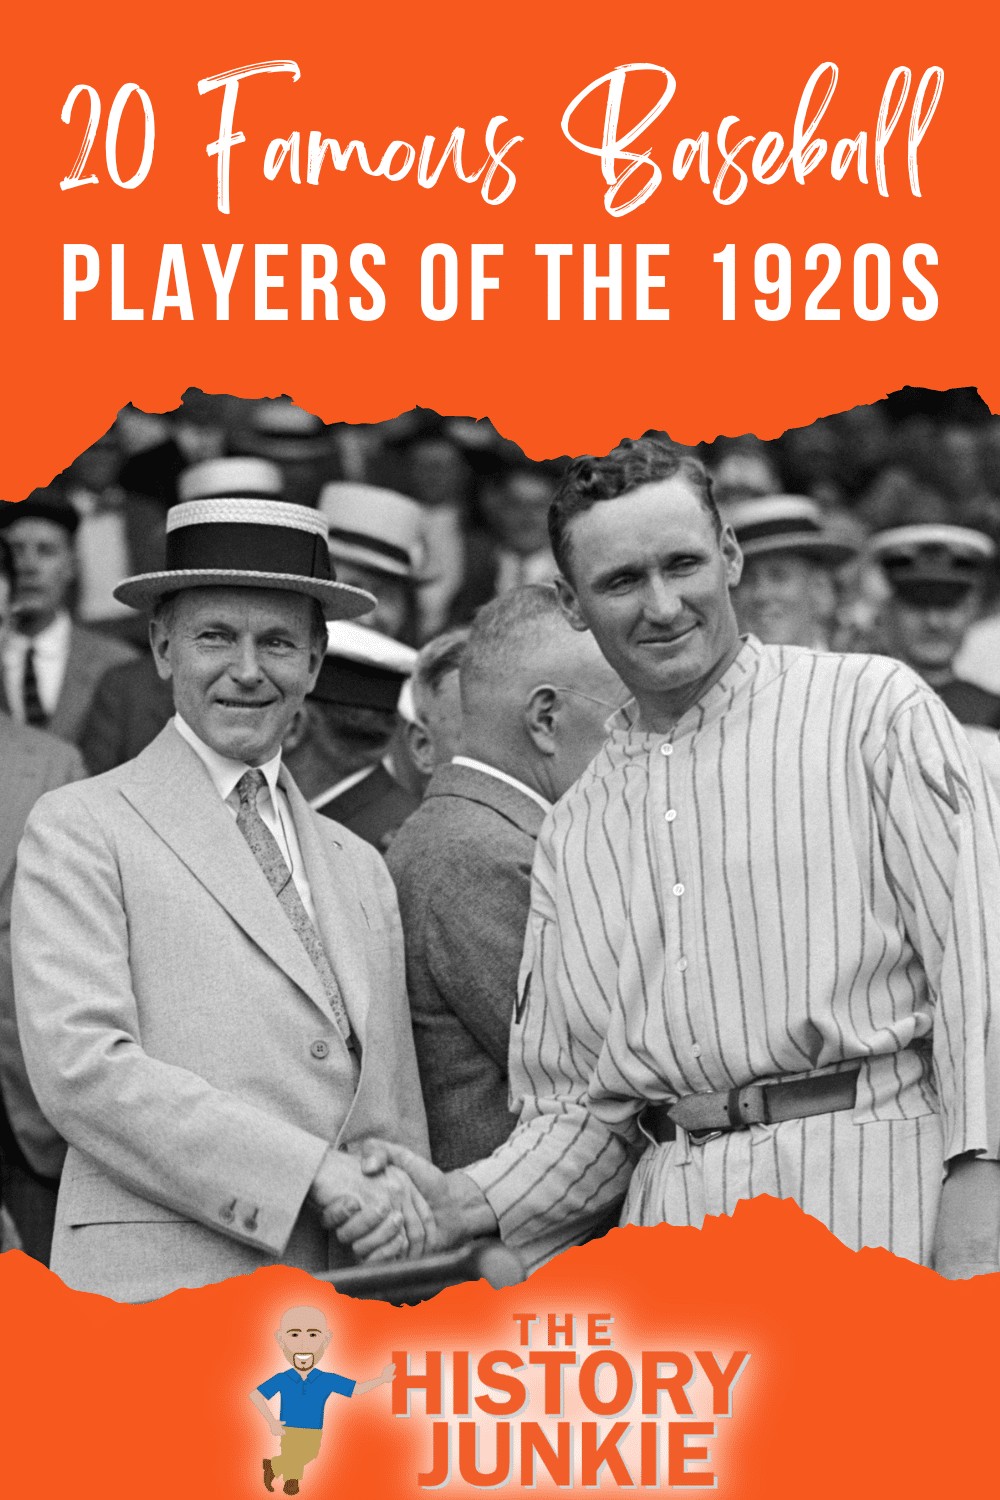 The Most Famous Baseball Players of the 1920s